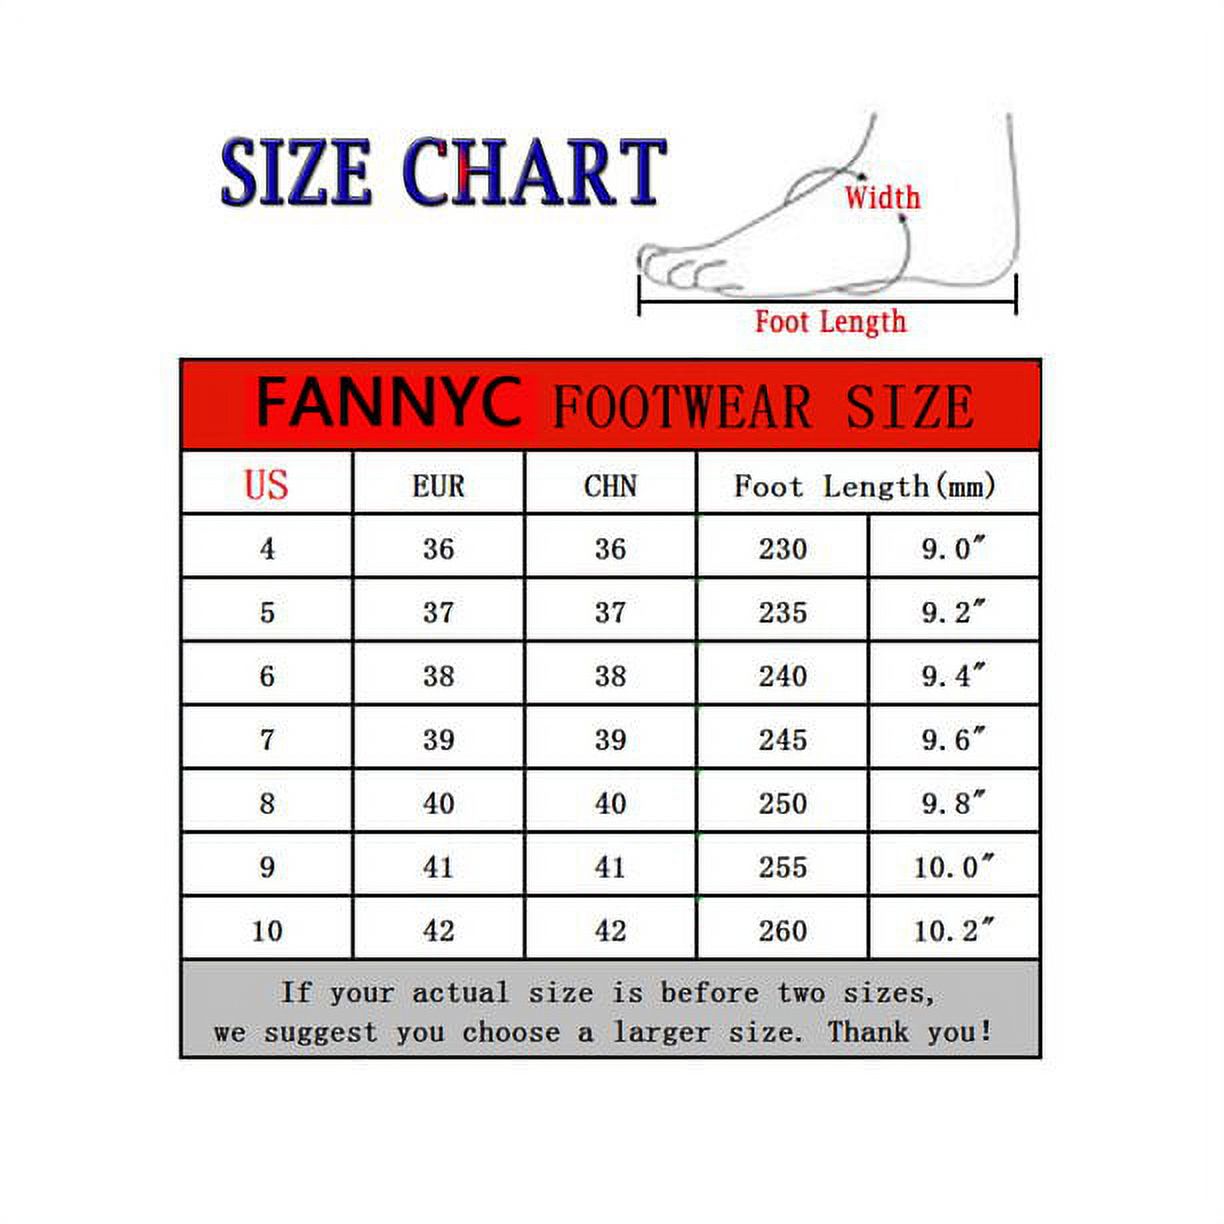 FANNYC Women's Ethnic Style Casual Fit Flat Office Shoes Non-Slip Flat Walking Shoes with Delicate Embroidery Flower Slip On Flats Shoes Round Toe Ballet Flats (4-10 Size) - image 3 of 7